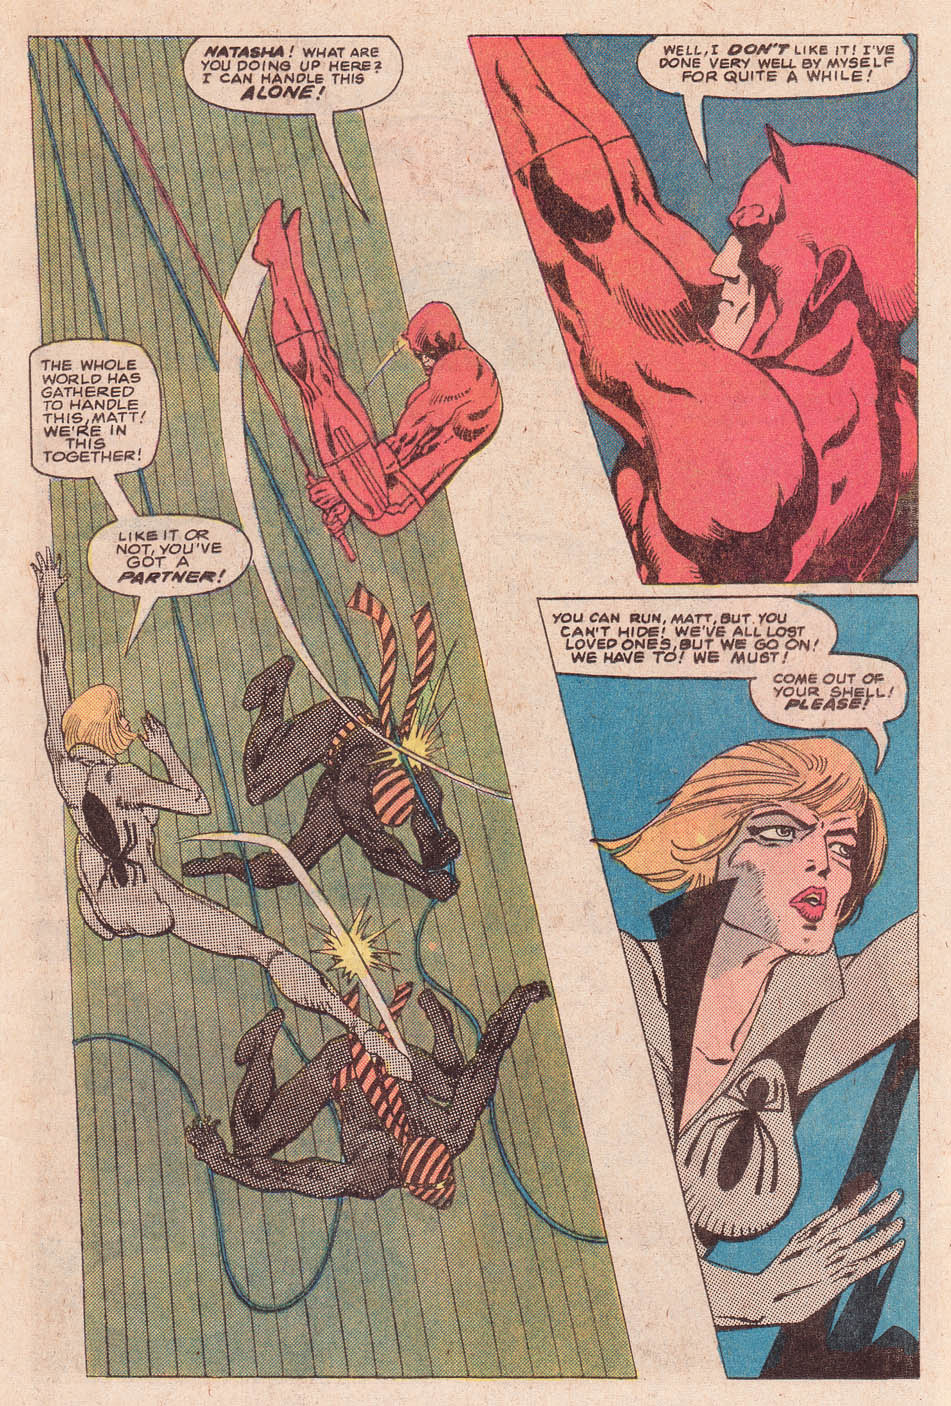 What If? (1977) issue 38 - Daredevil and Captain America - Page 35